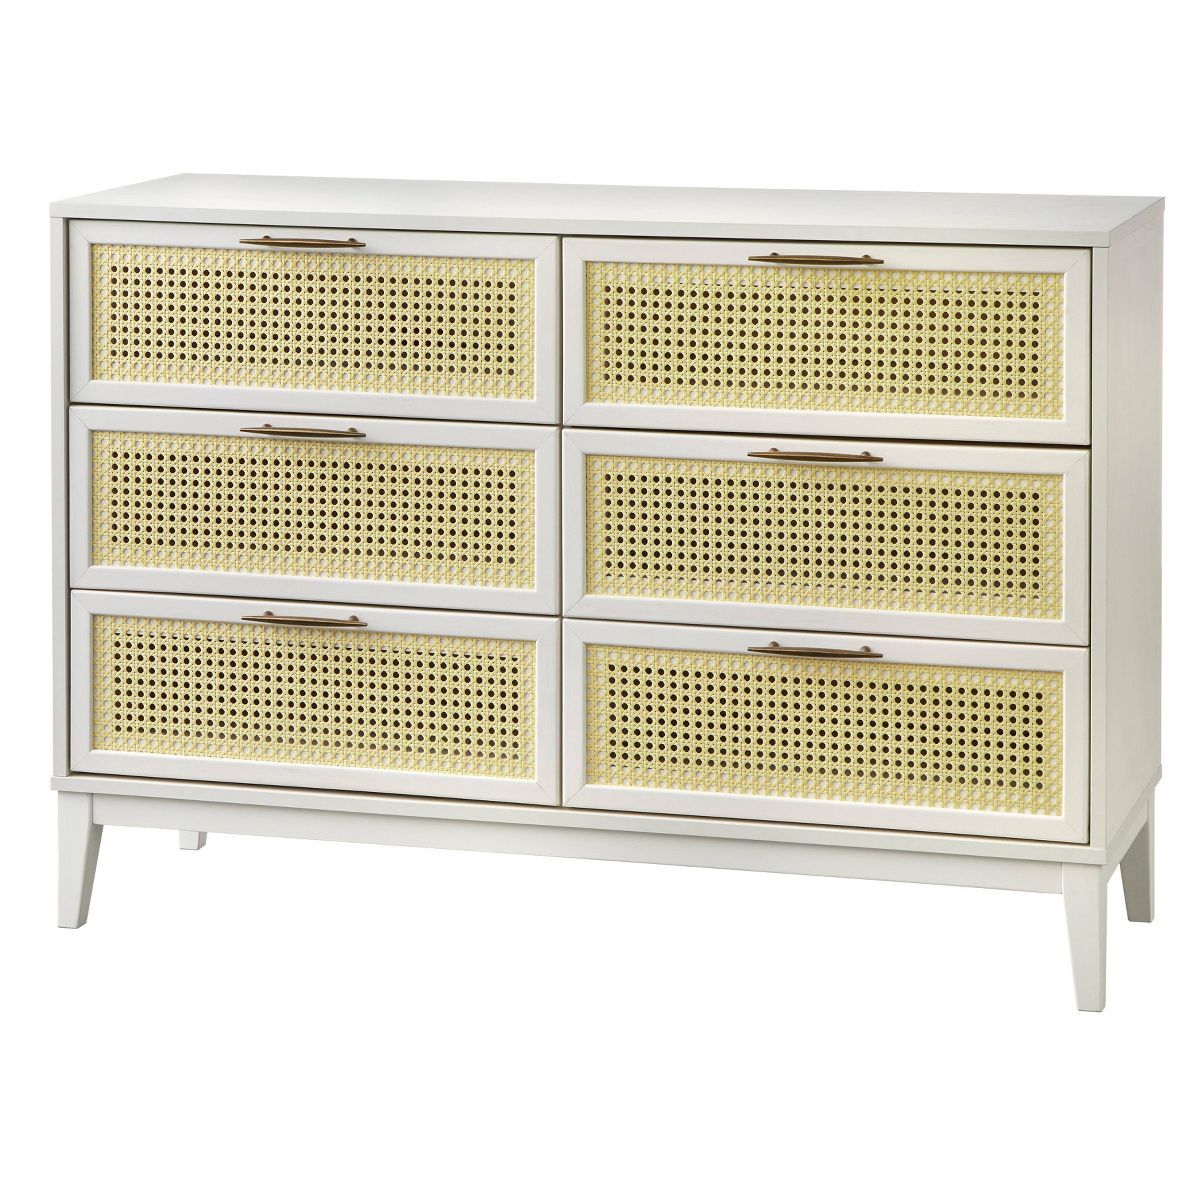 Andros 6 Drawer Dresser with Faux Cane Drawer Fronts - Buylateral | Target